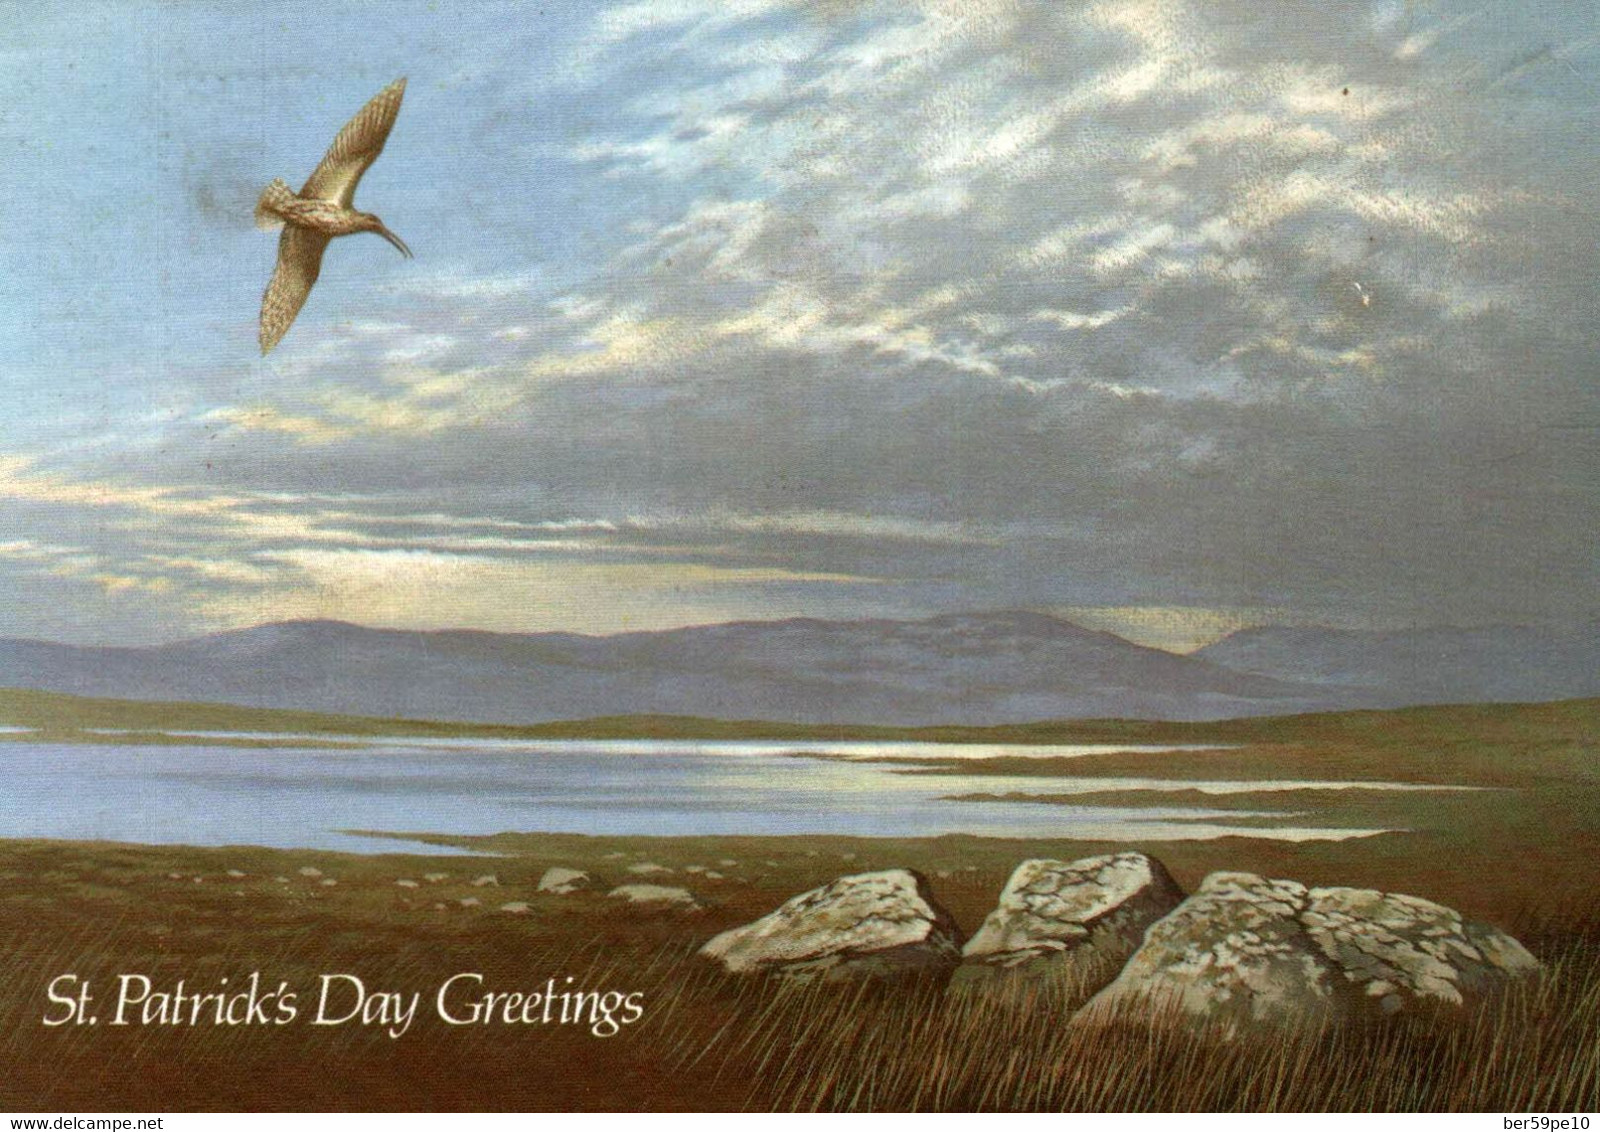 ST PATRICK'S DAY GREETINGS - LANDSCAPE AN EXAMPLE OF THE UNSPOILT BEAUTY STILL EXISTING IN IRELAND - Saint-Patrick's Day